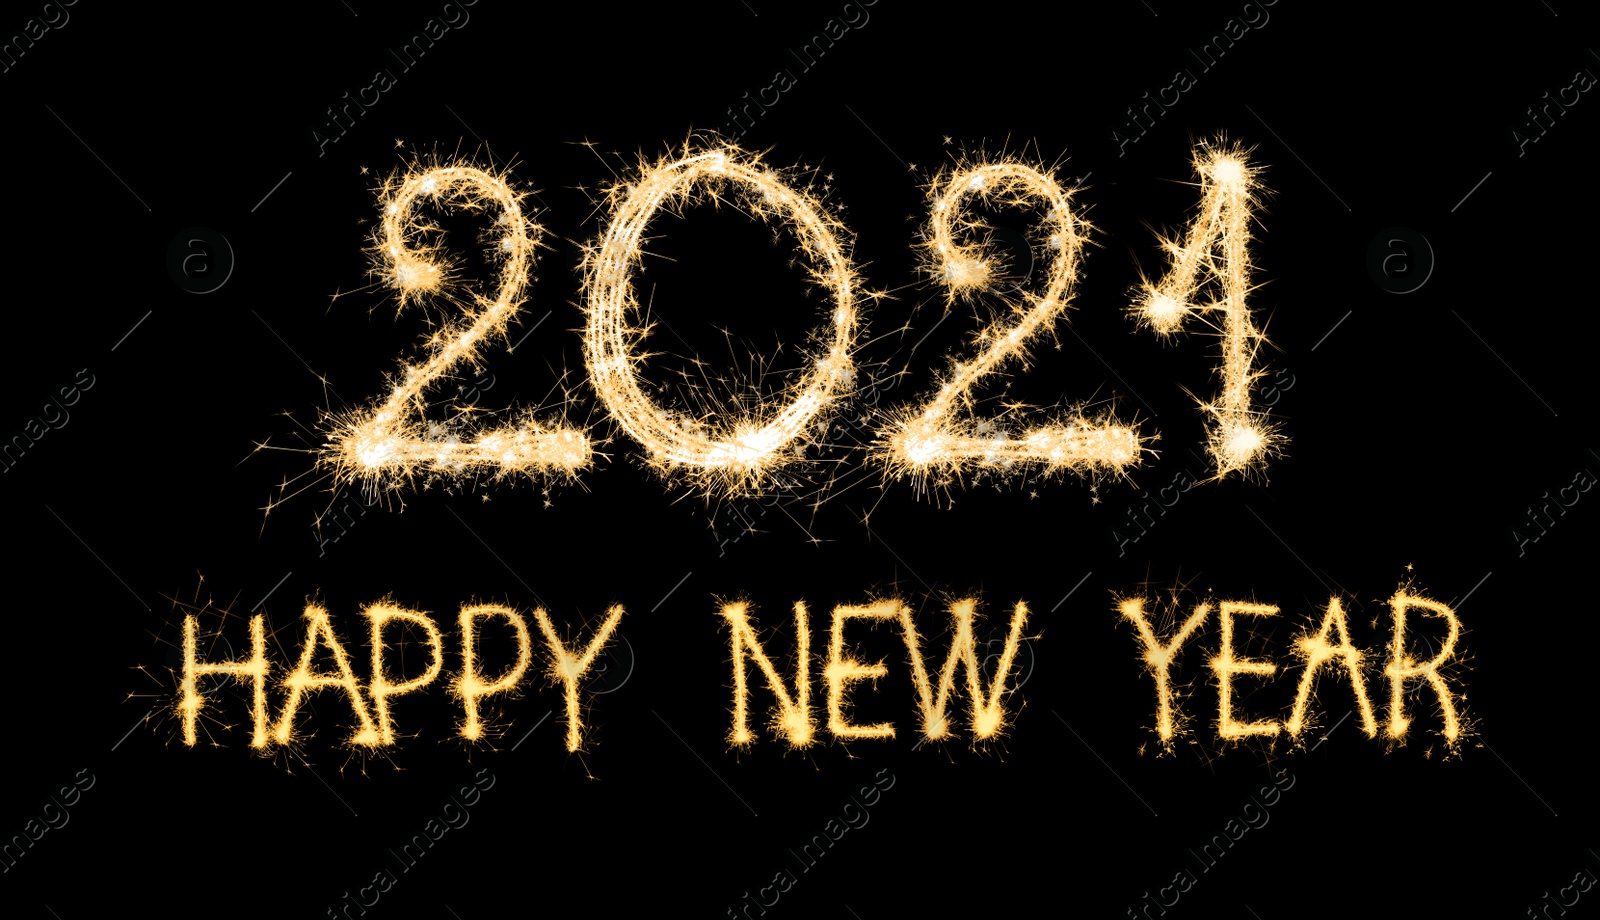 Image of Happy new year card. 2021 and text silhouettes made of sparkler on black background